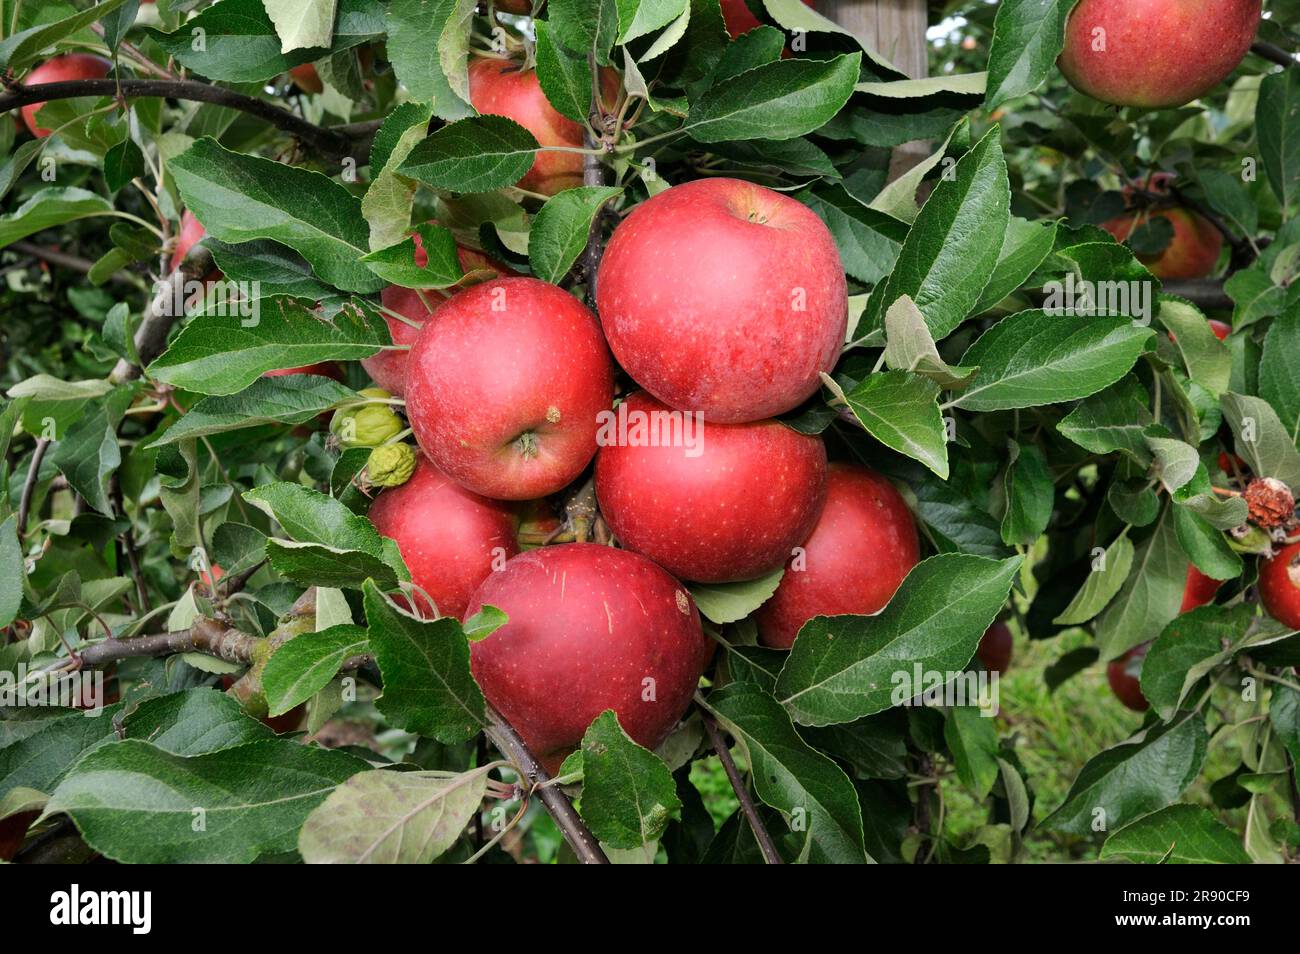 Apples Elstar Red Flame on the tree (Malus domestica) Stock Photo